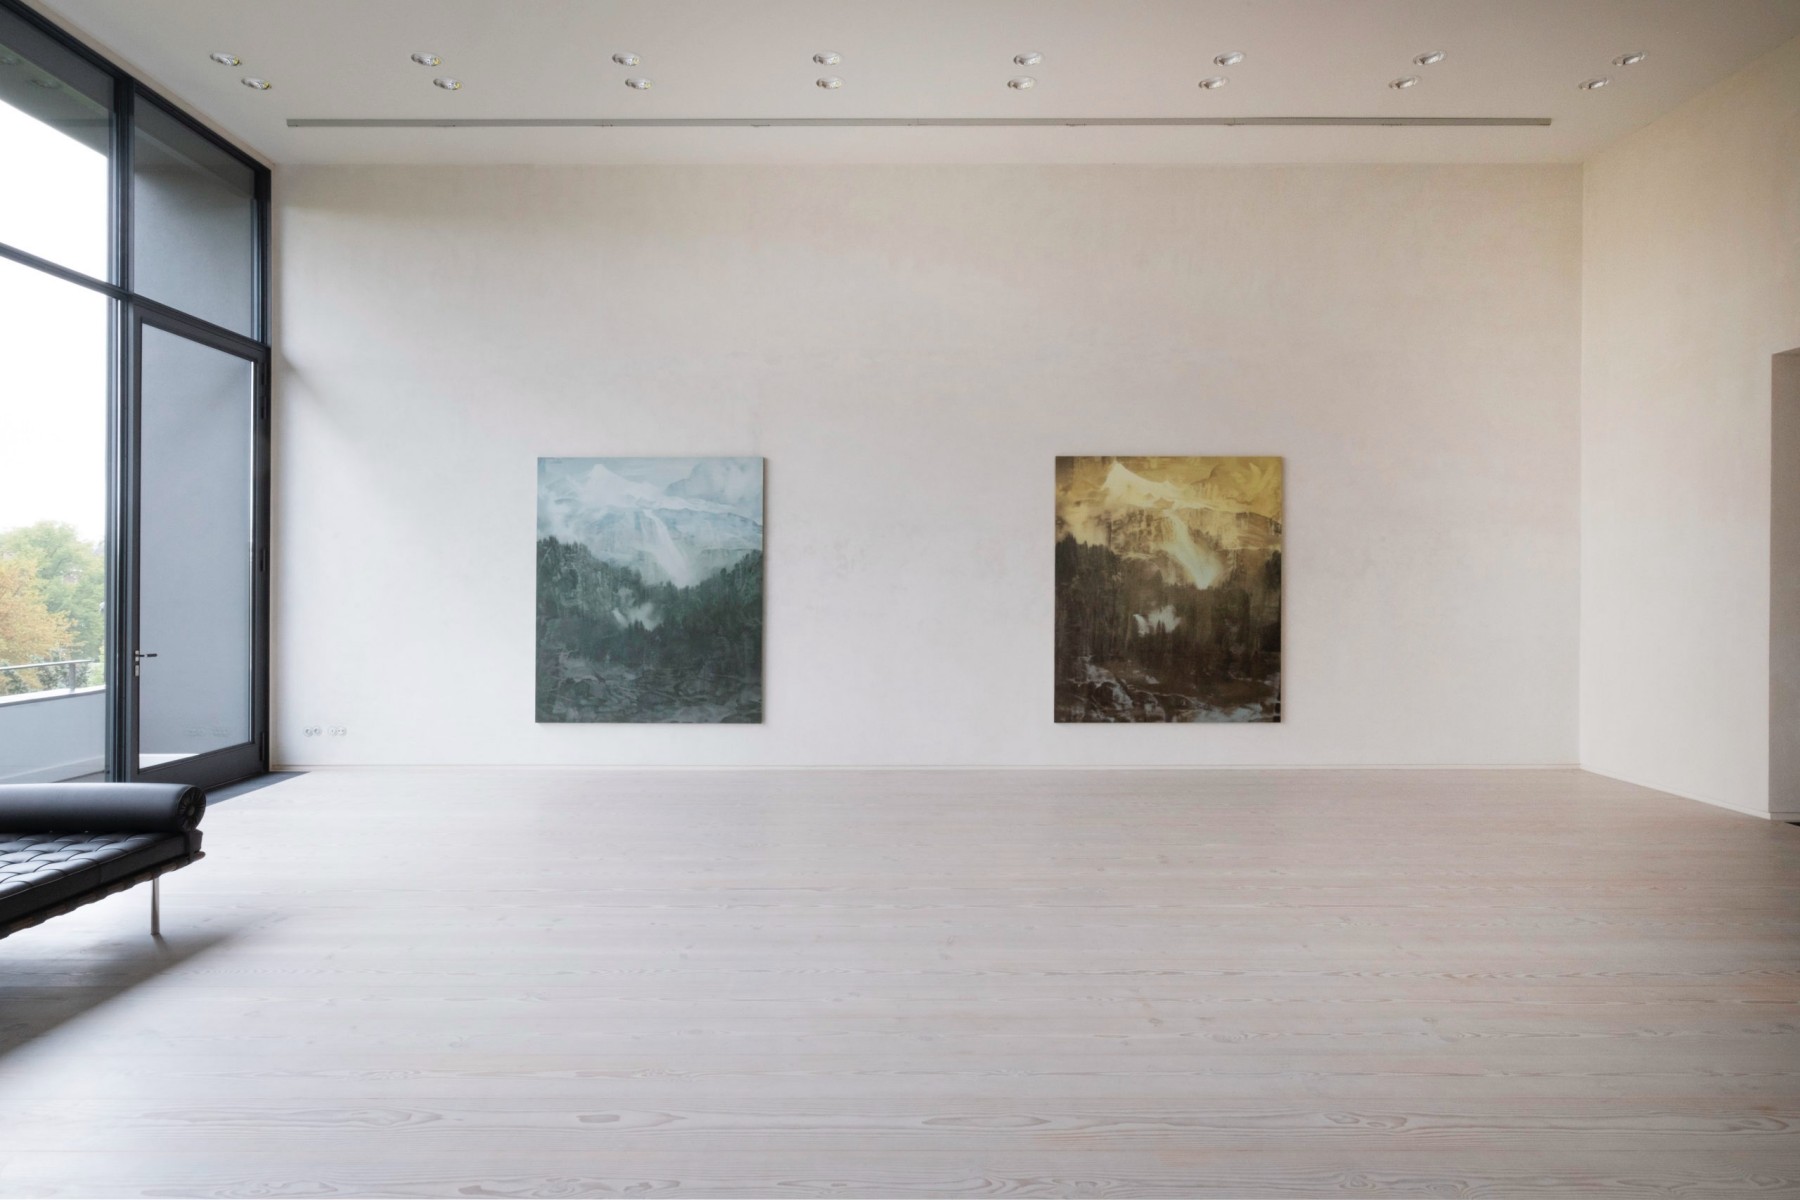 Installation image for Paul Winstanley: The Persistence of the Sublime, at Galerie Vera Munro